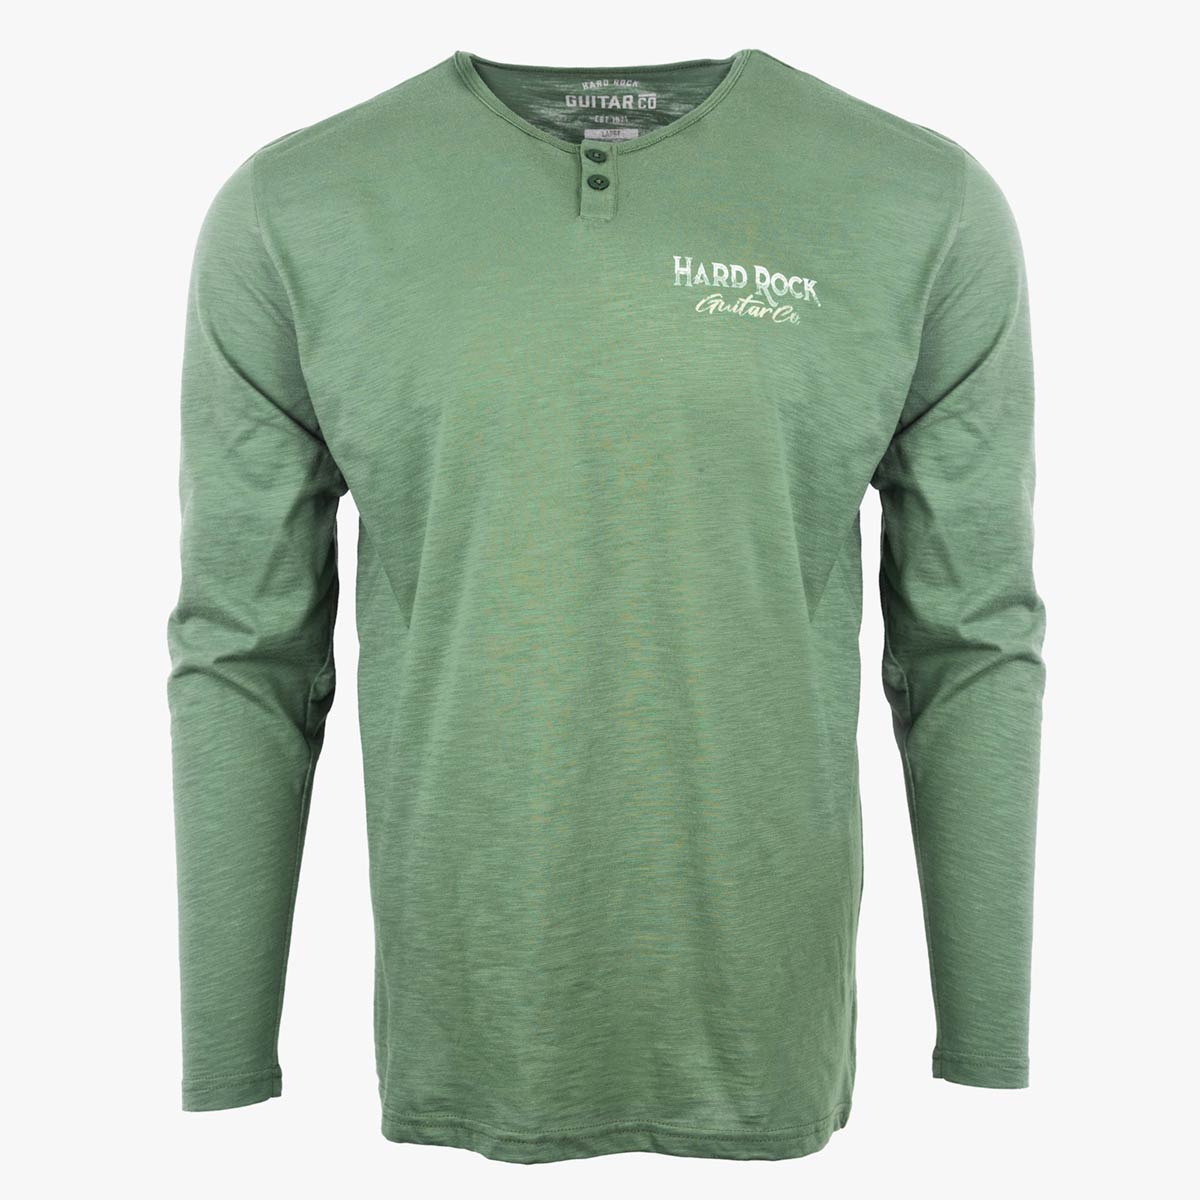 Guitar Company Hybrid Henley Longsleeve Tee in Military Green image number 4